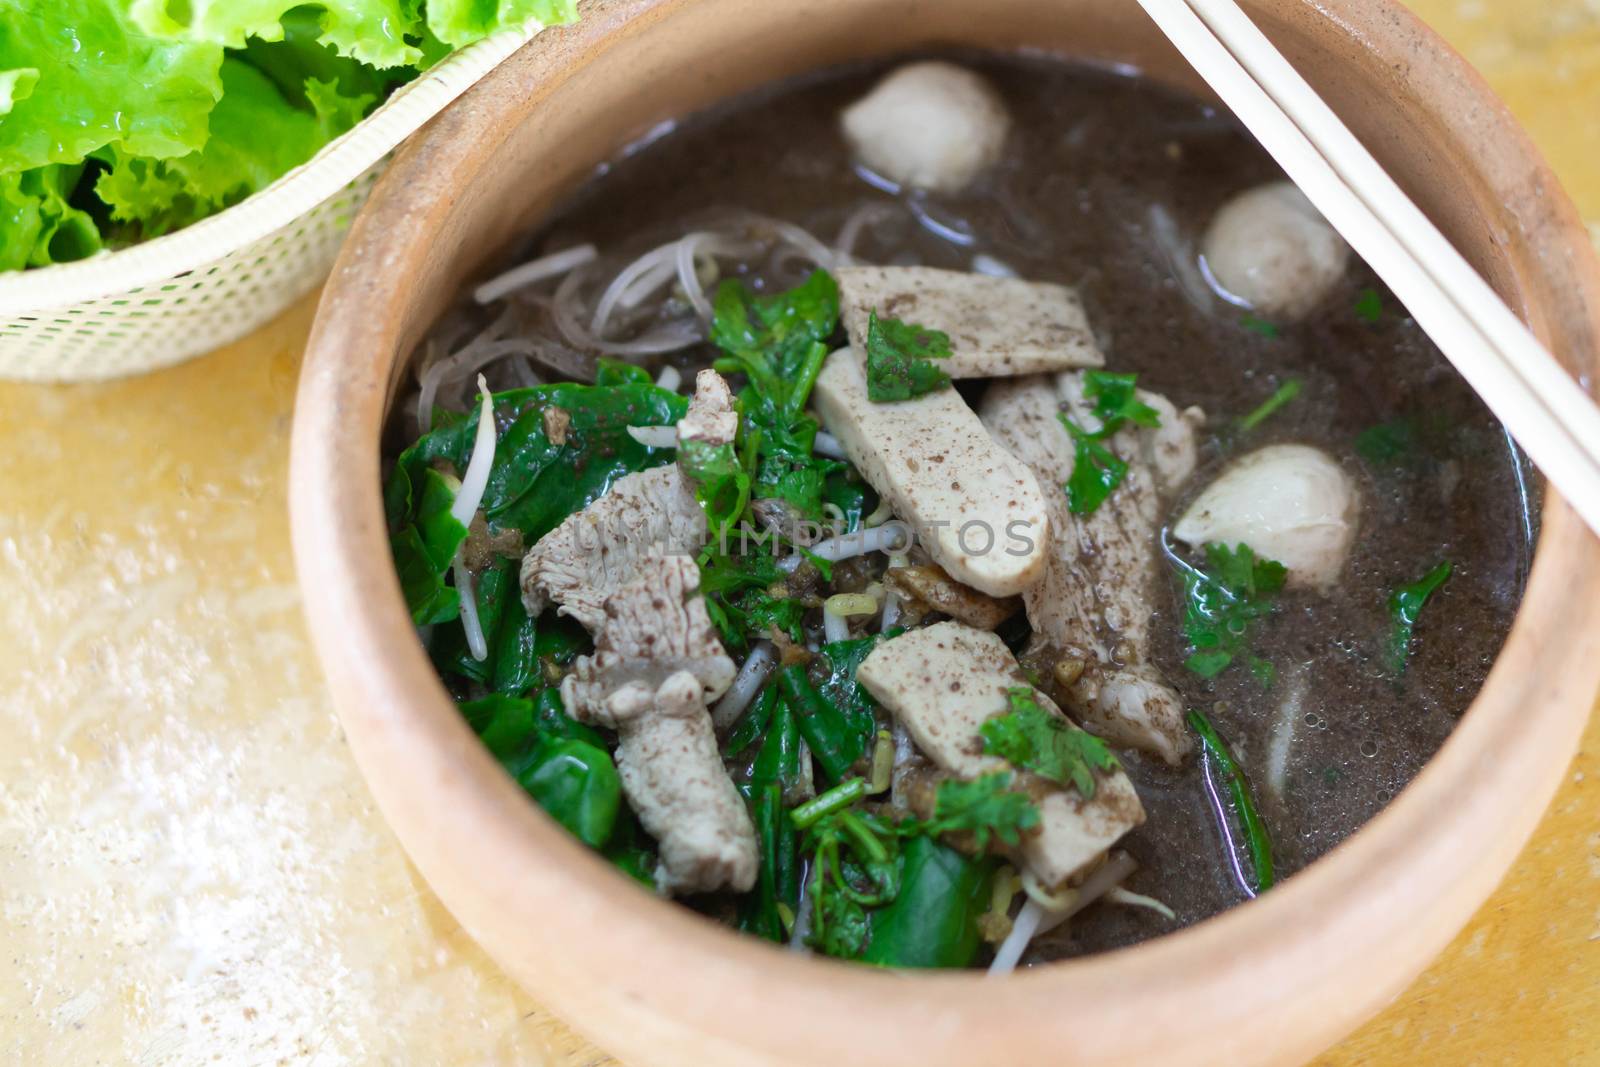 Rice noodle soup with Cooked Liver in  bowl on table, selective focus